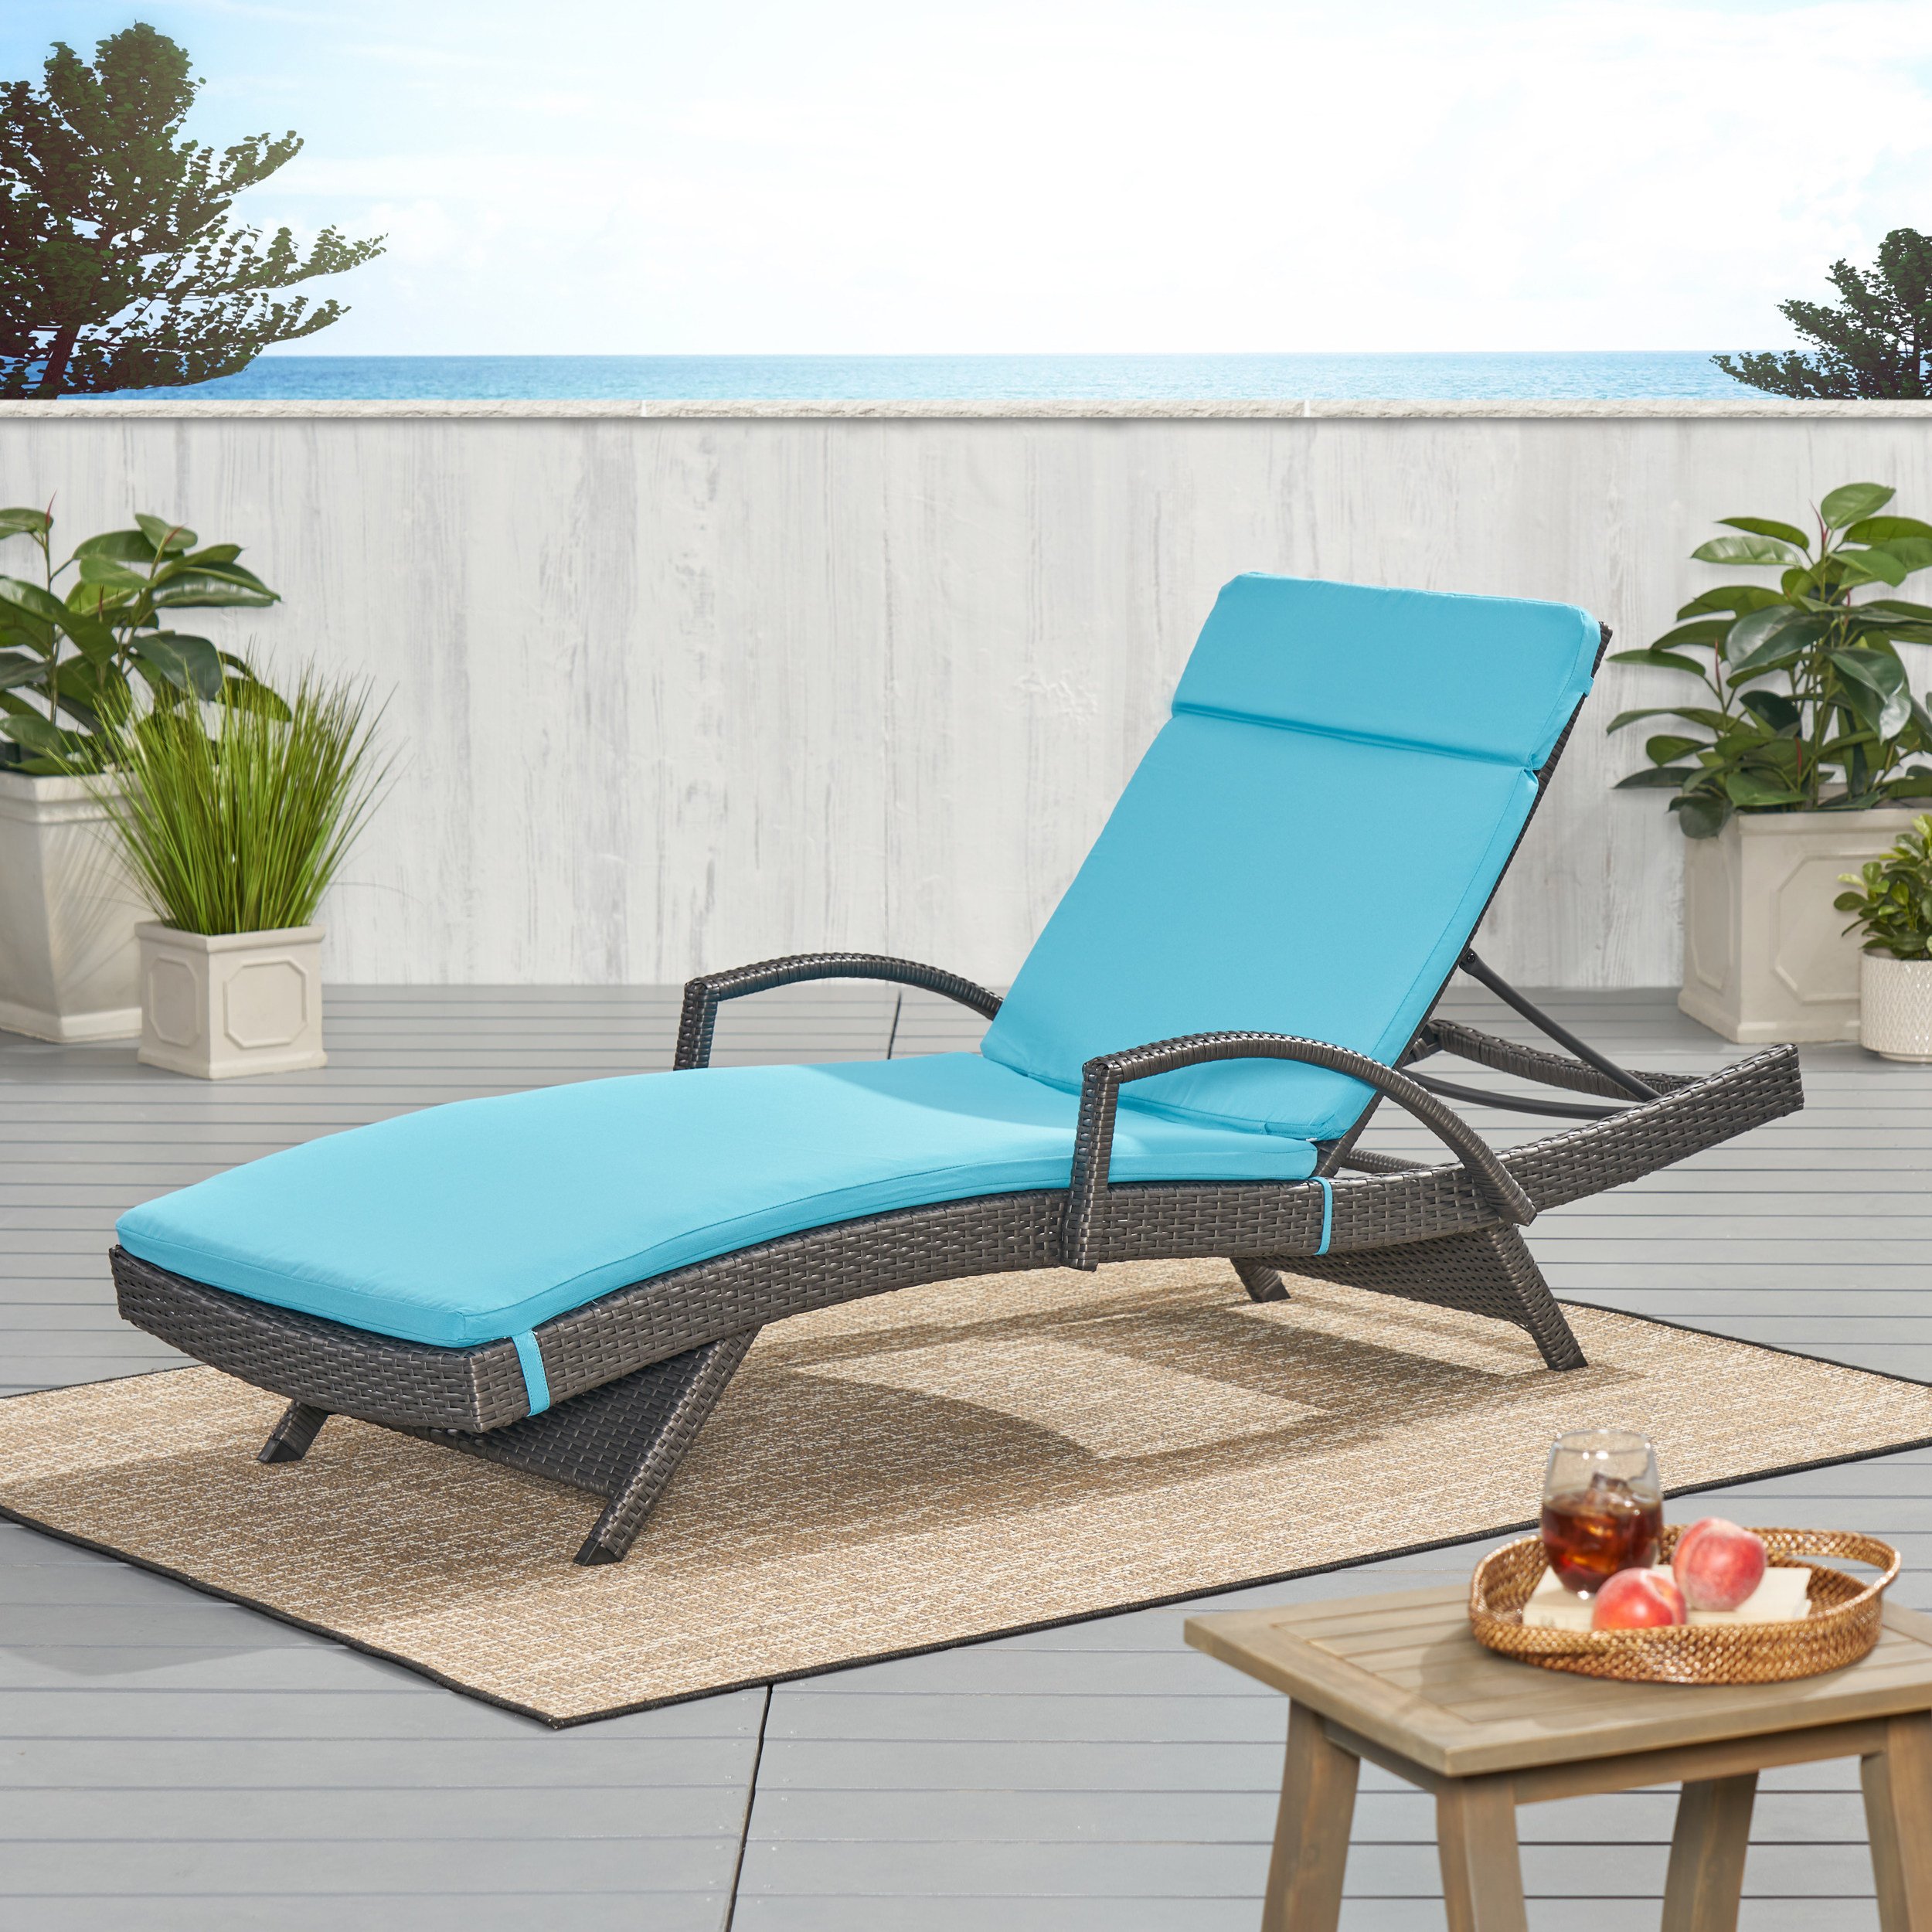 Soleil Outdoor Water Resistant Chaise Lounge Cushion - Textured Beige